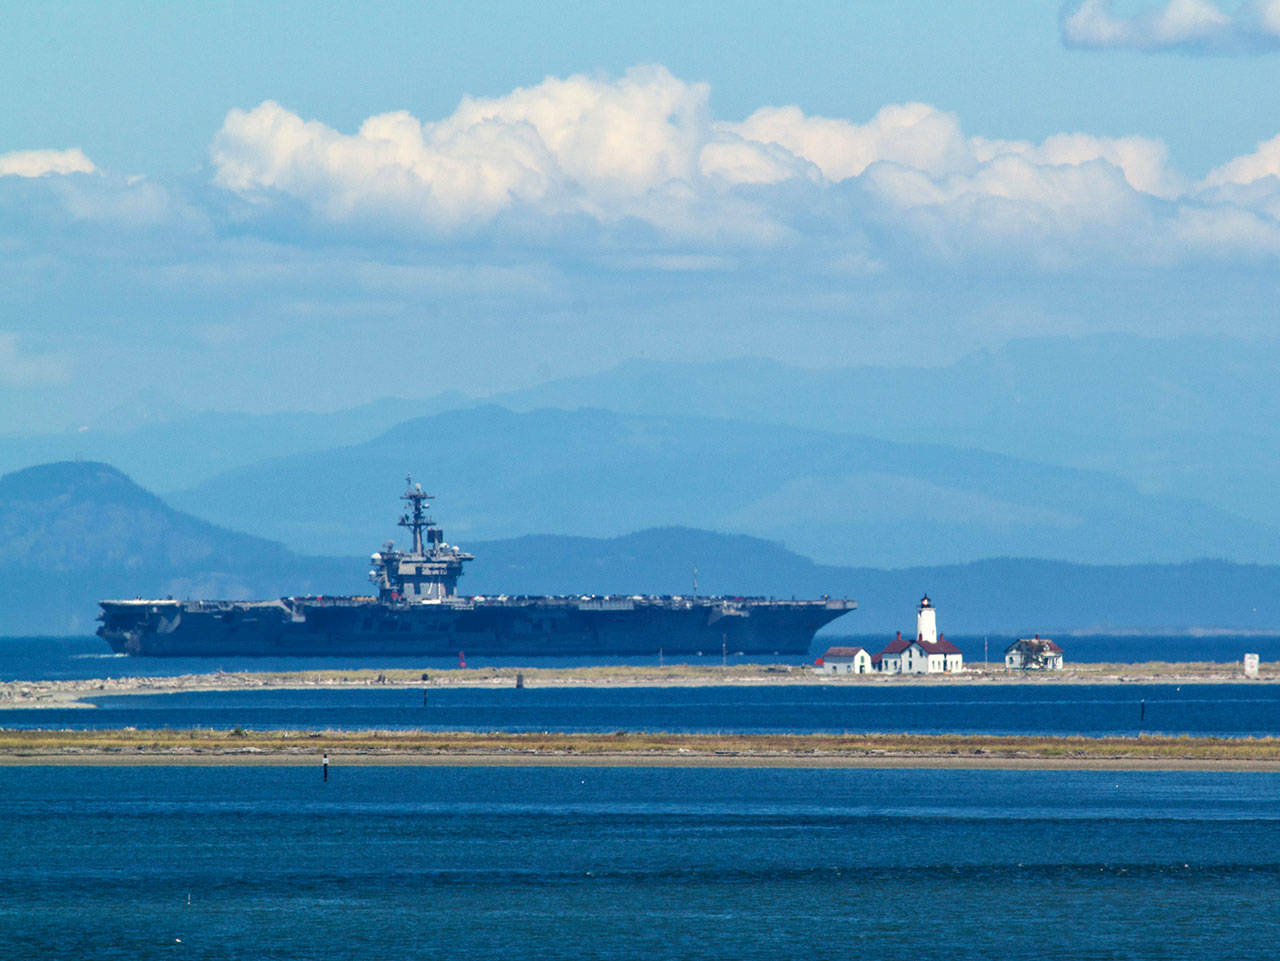 Contributor Kip Tuplin caught this image of the USS Teddy Roosevelt — a Nimitz-class, nuclear-powered, aircraft carrier — as it passes the New Dungeness Lighthouse on July 22. The U.S. Navy ship, along with 2,500 sailors and their families, are calling the Puget Sound their new home for the next year and a half at Naval Base Kitsap in Bremerton.